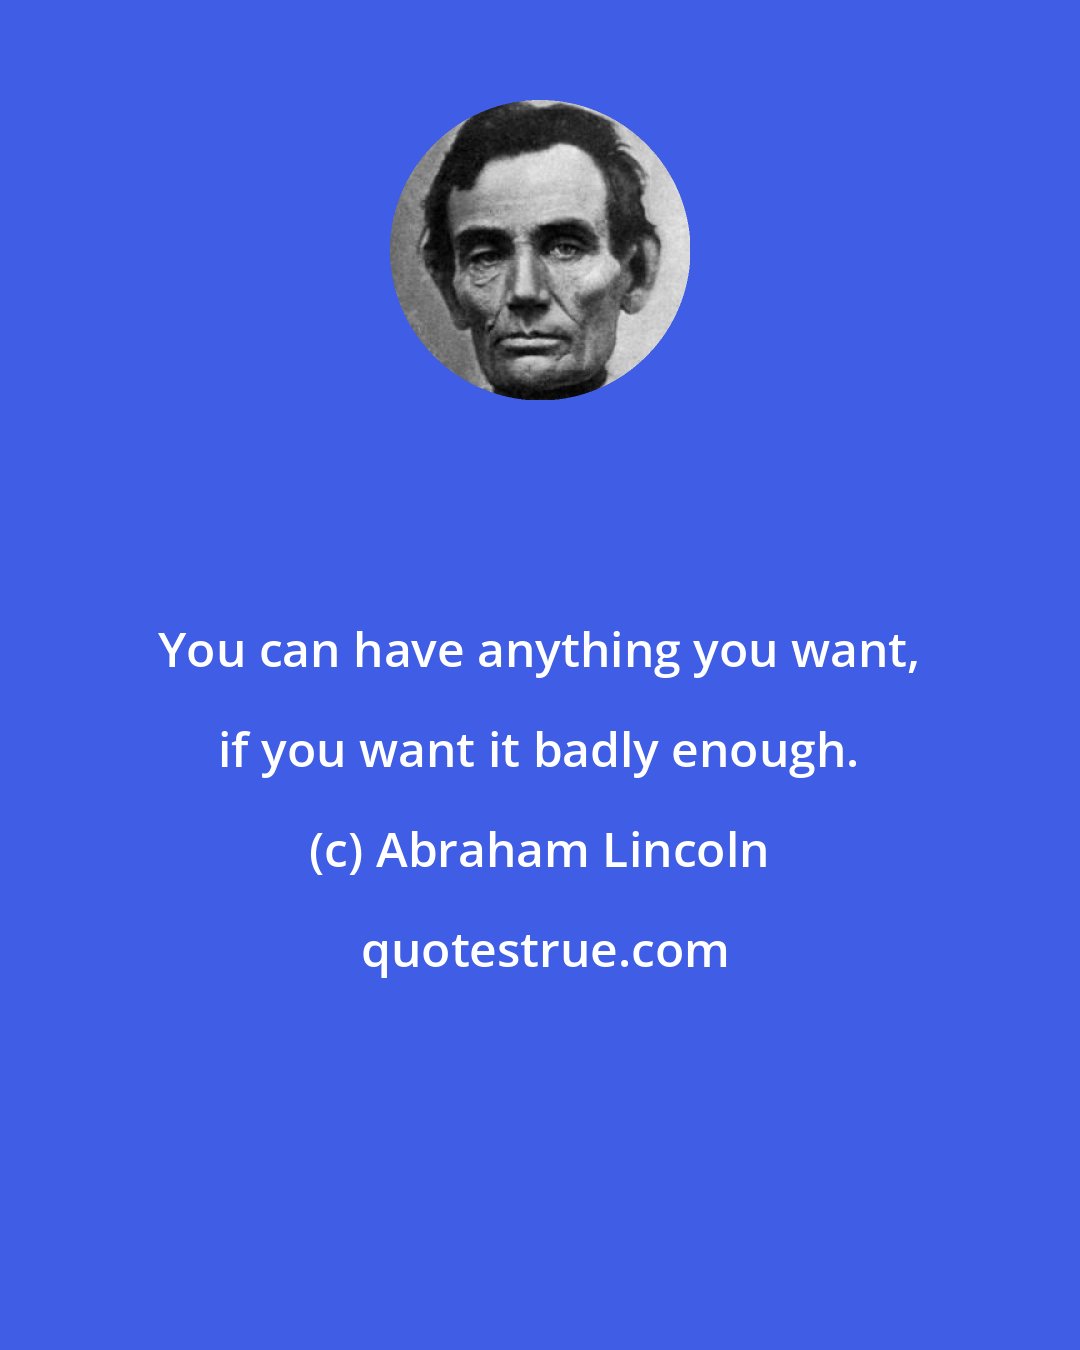 Abraham Lincoln: You can have anything you want, if you want it badly enough.